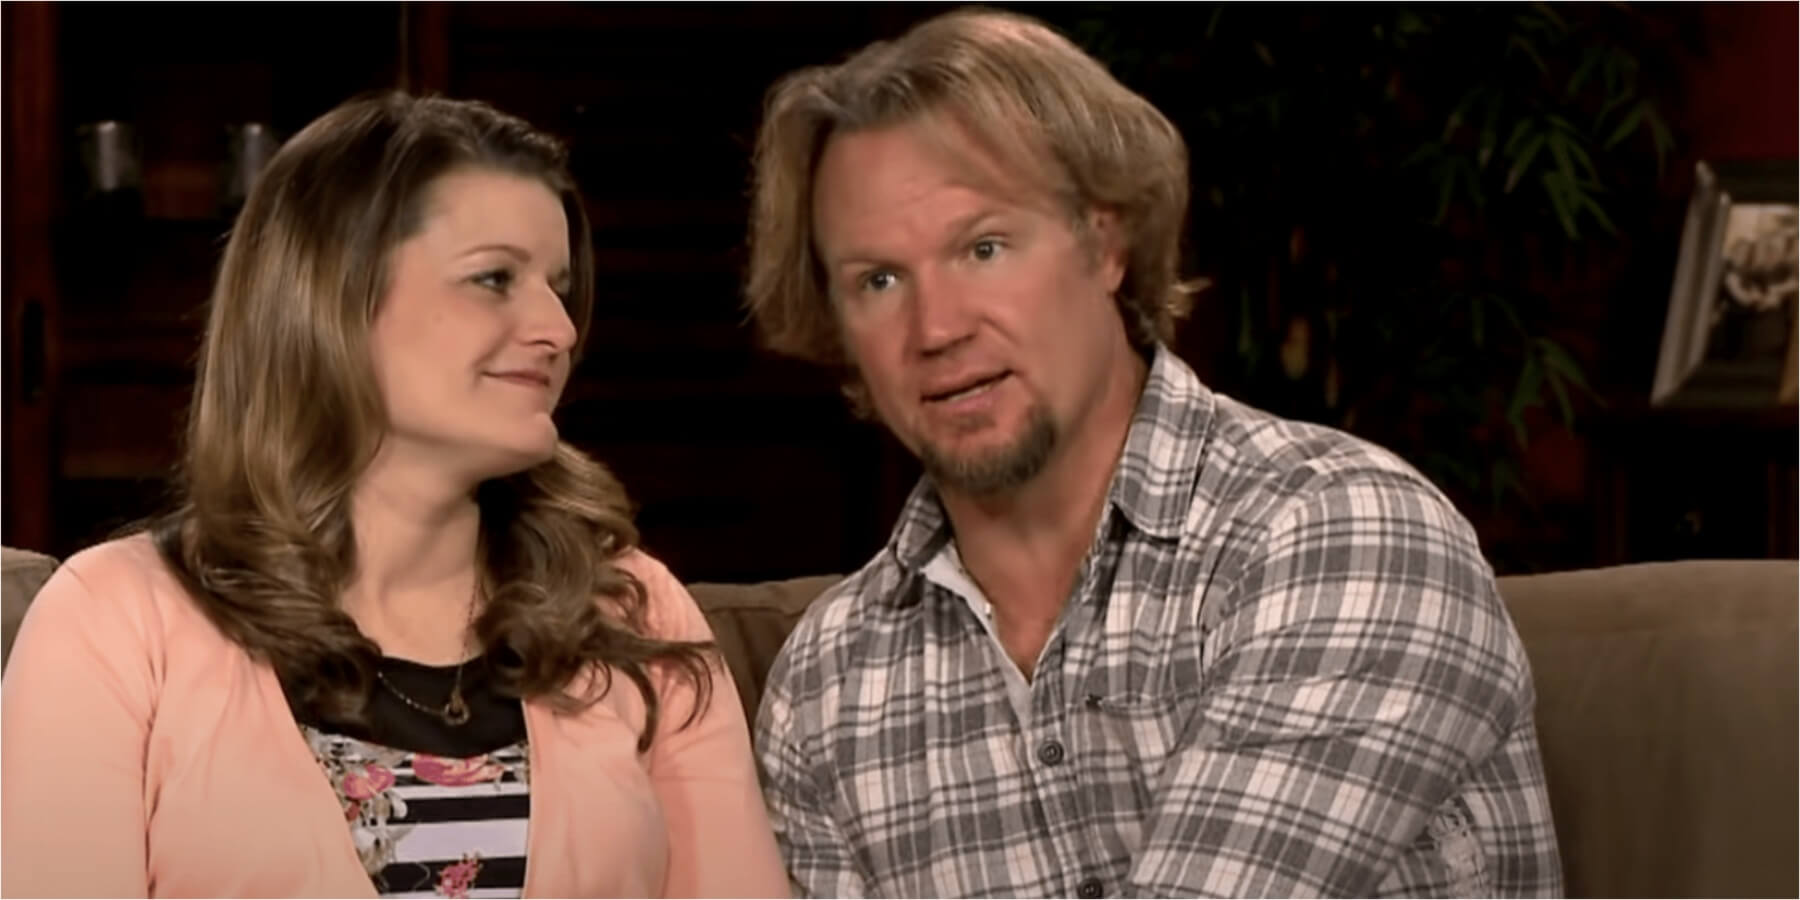 Robyn Brown and Kody Brown in a screen grab from TLC's 'Sister Wives'